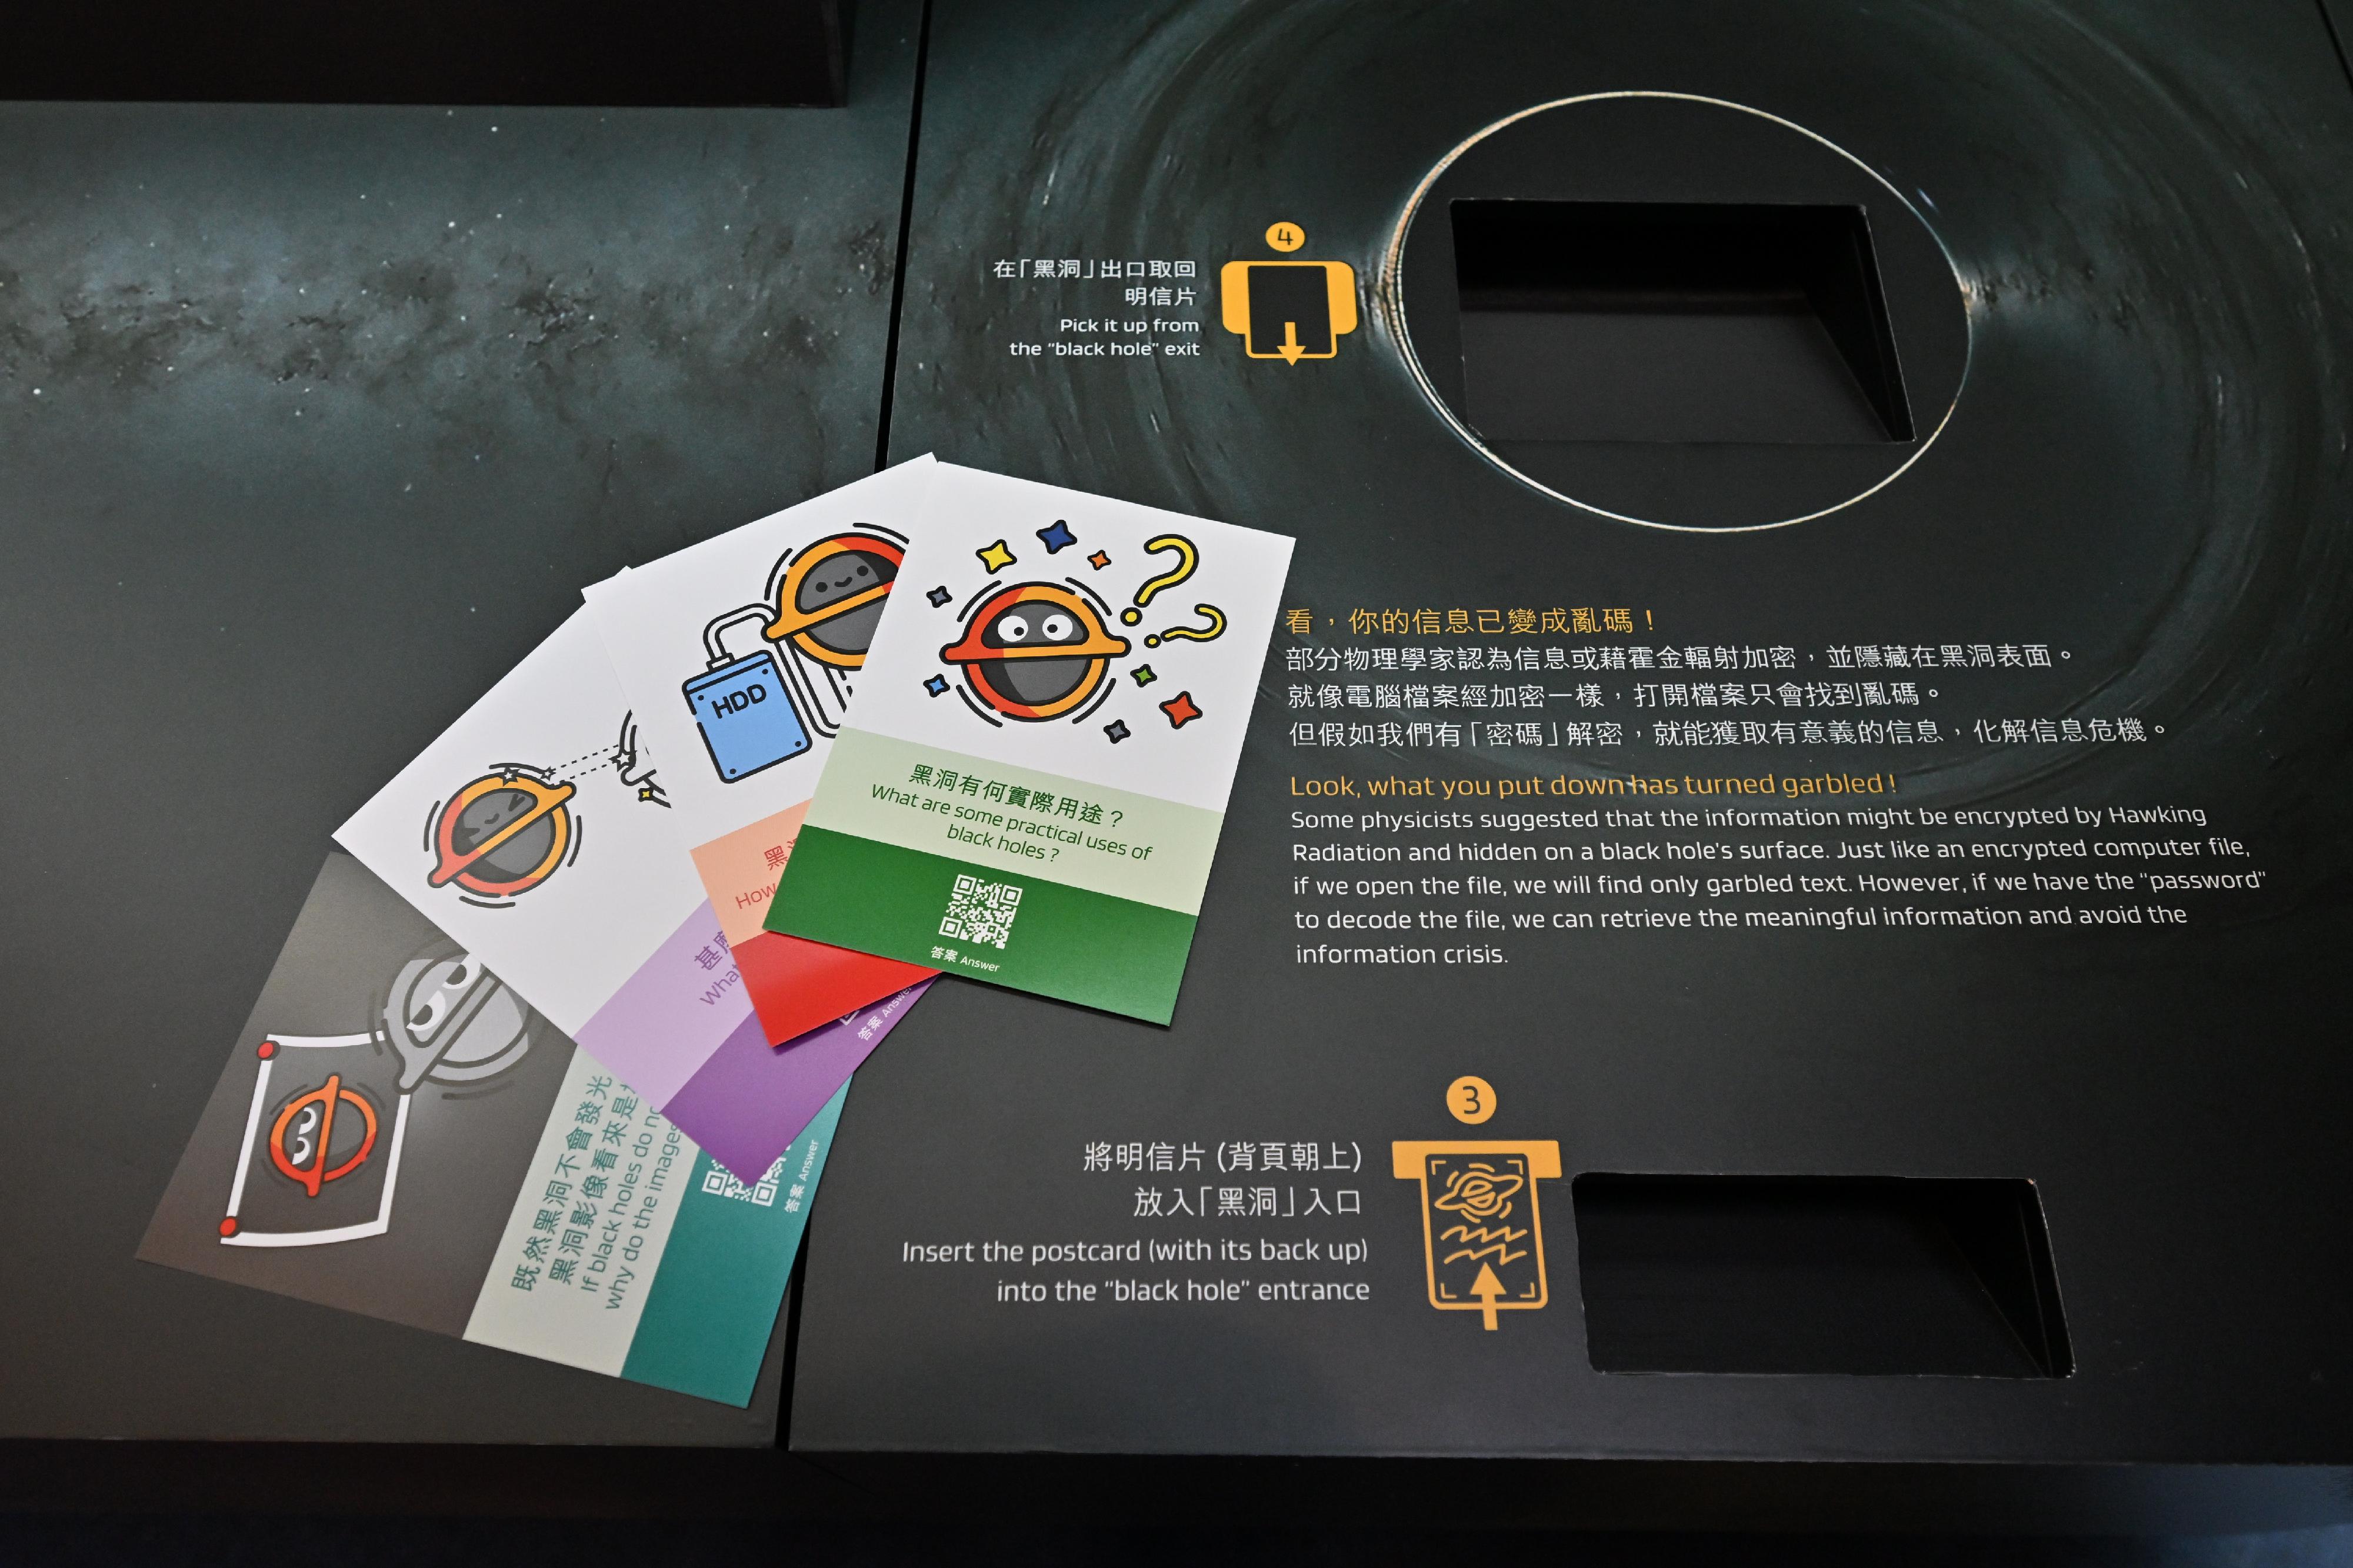 The Hong Kong Space Museum will launch a new free special exhibition, "Black Hole: The Information Barrier", starting tomorrow (October 25). This interactive exhibit at the exhibition allows visitors to input information into the simulated black hole and see the results.